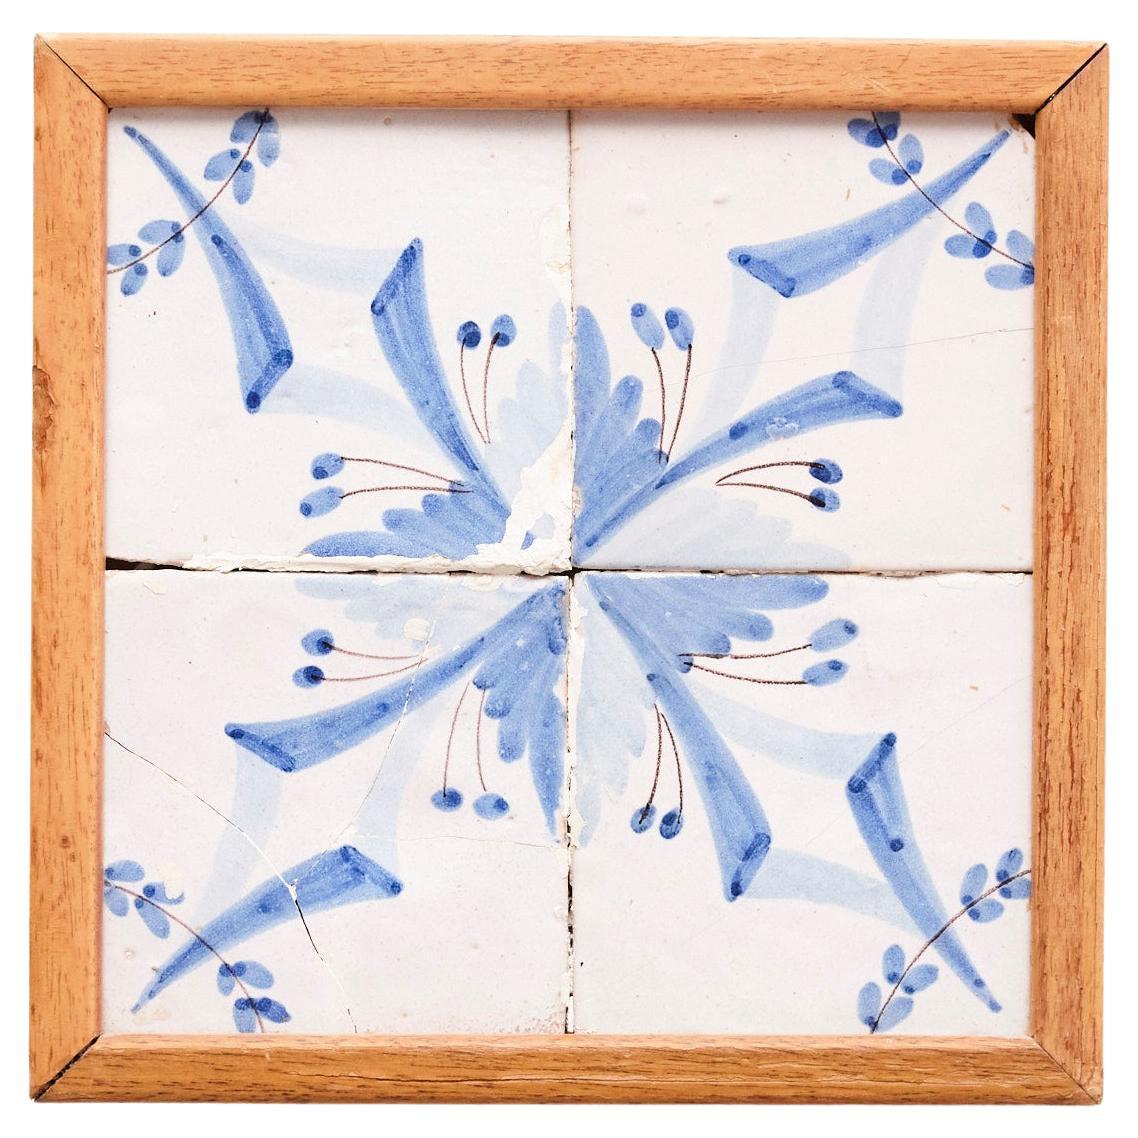 Framed Ceramic Tile Hand Painted Composition, circa 1950 For Sale